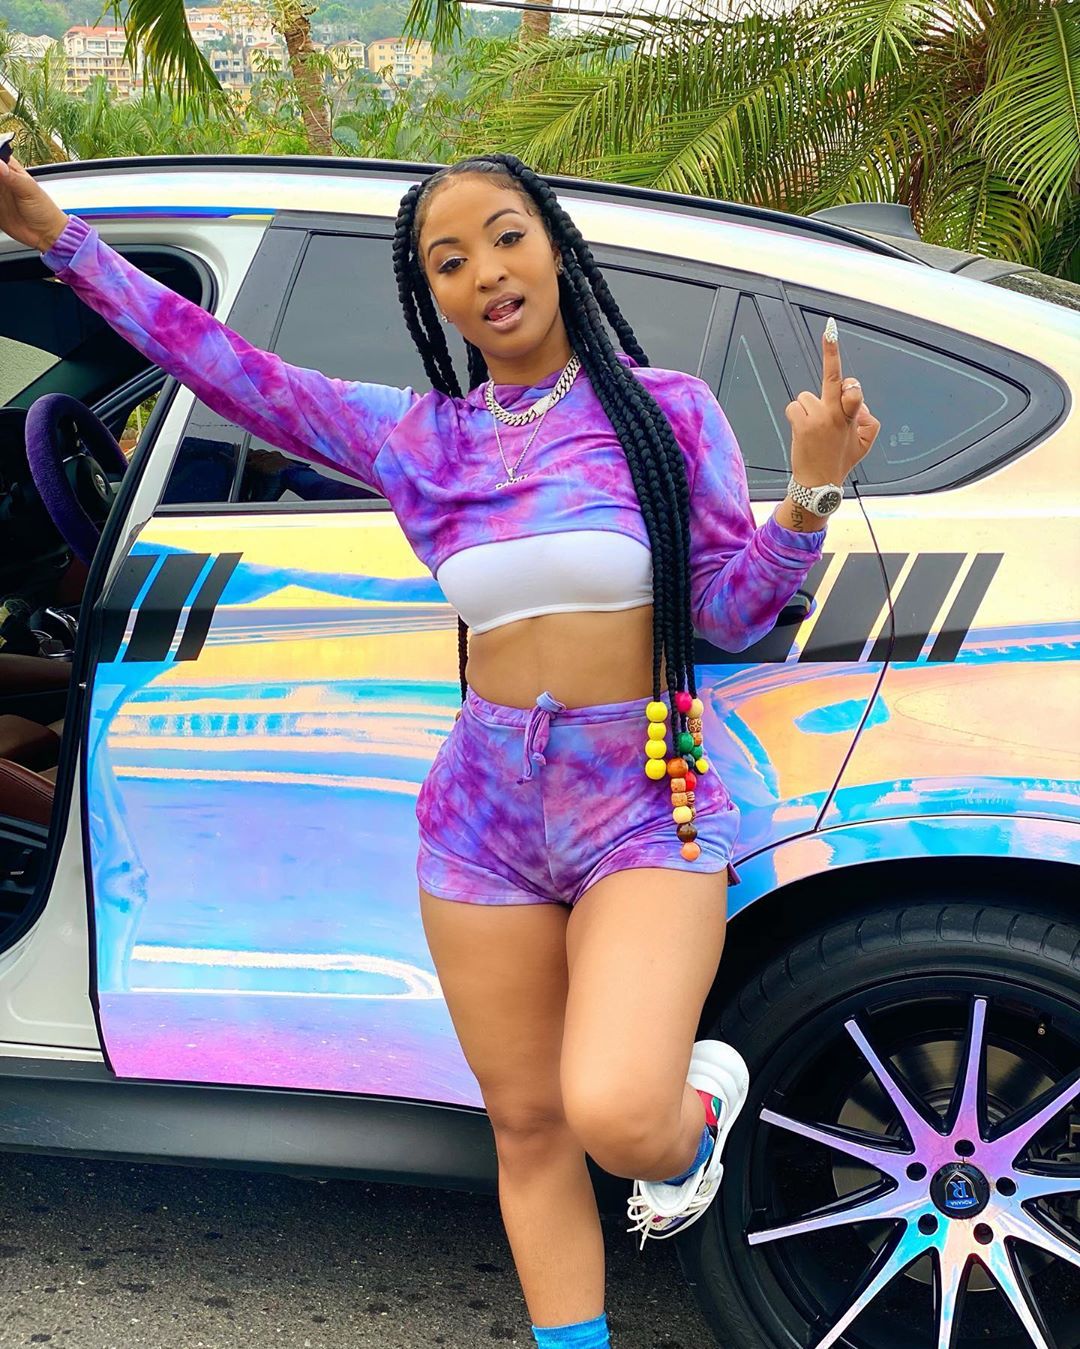 Shenseea did not respond to the rumor circulating online, but she did addre...